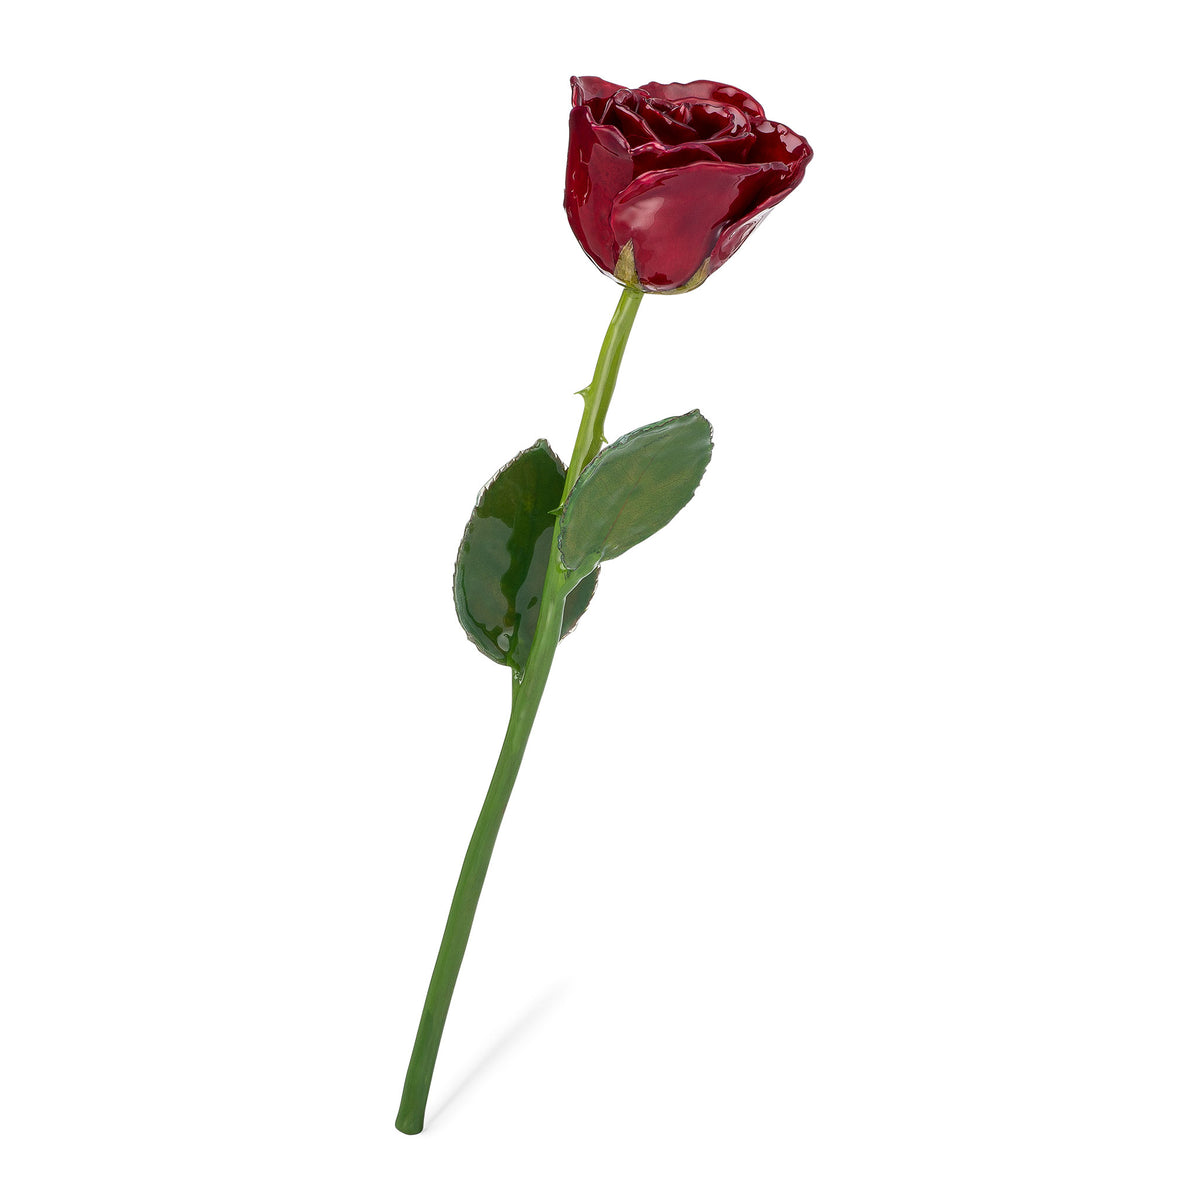 Natural (Green Stem) Forever Rose with Deep Red, Burgundy Colored Petals. View of Stem, Leaves, and Rose Petals. This a Forever Rose without any gold or other precious metals on it.